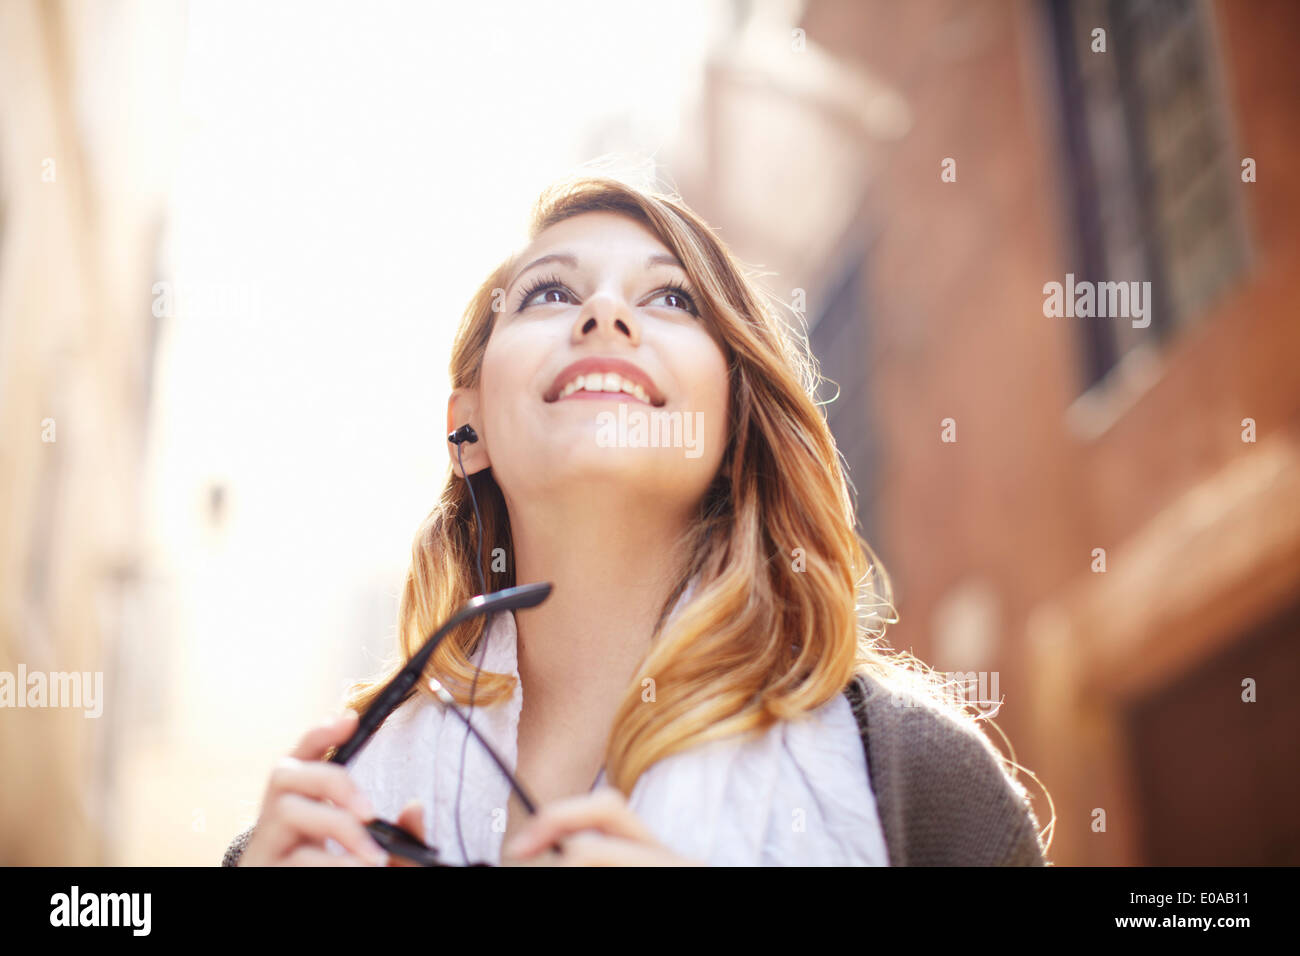 Young woman looking up at buildings, Rome, Italy Stock Photo